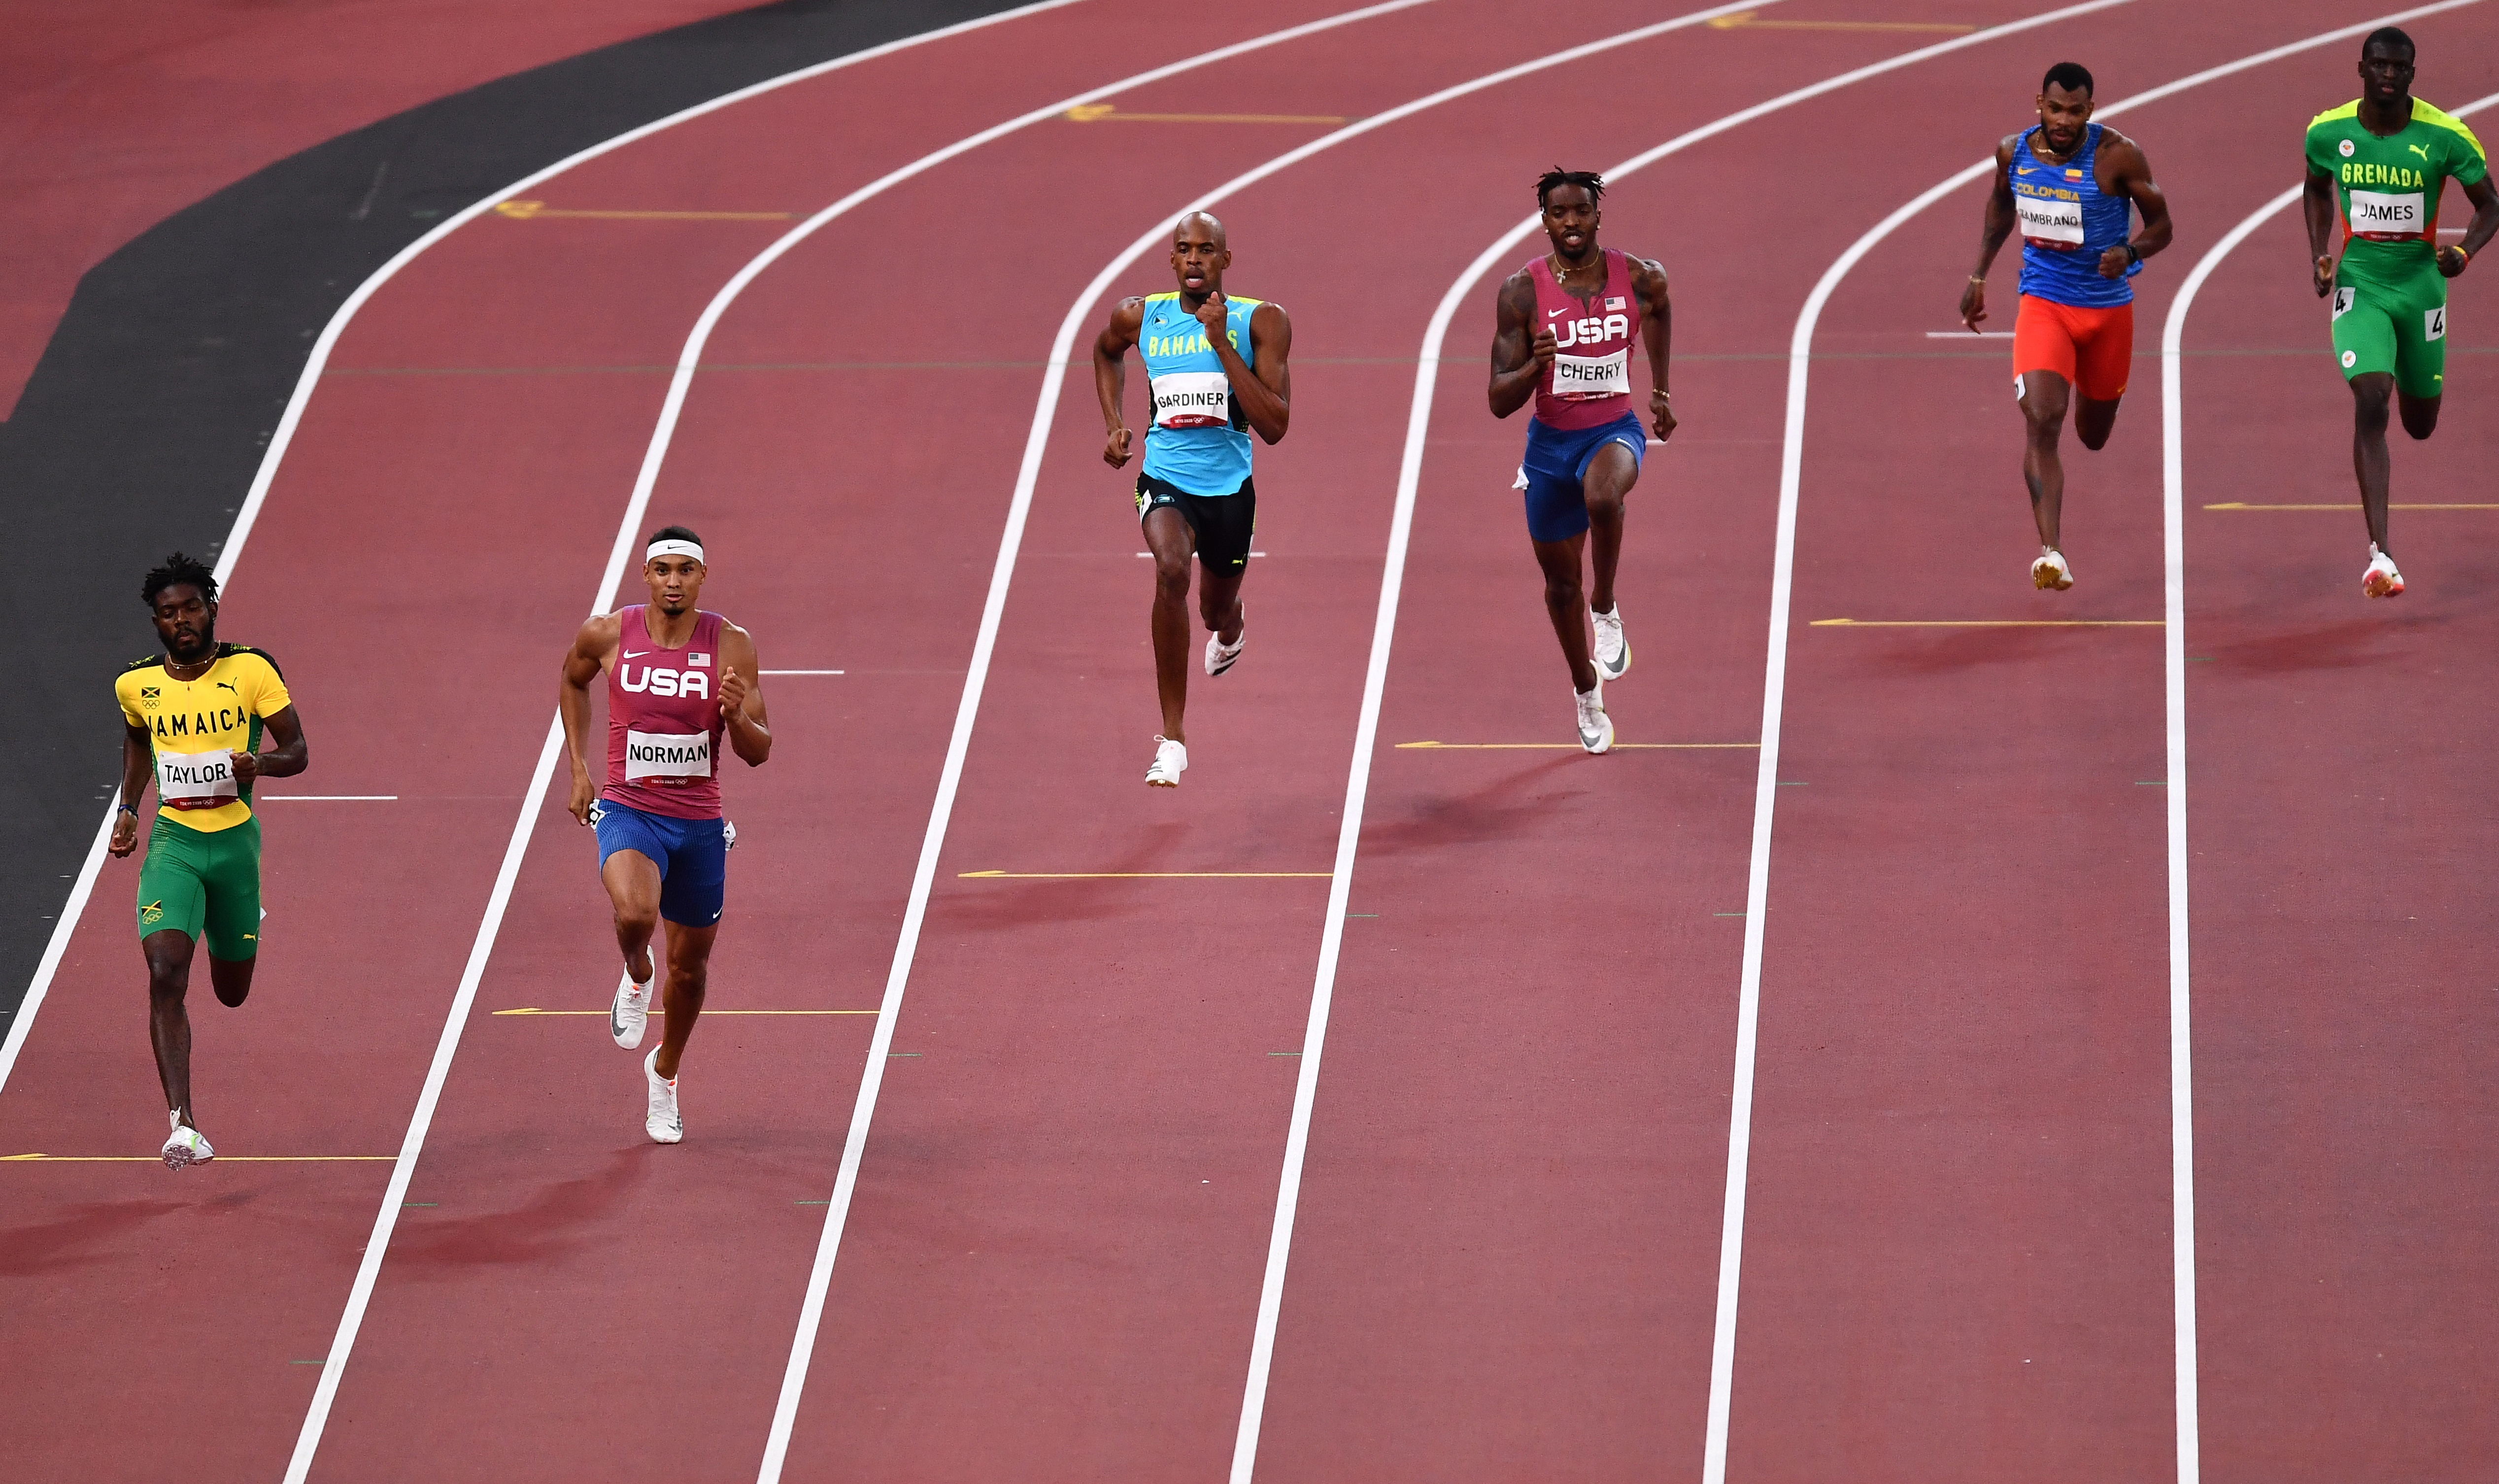 Tokyo 2020 Olympics - Athletics - Men's 400m - Final - Olympic Stadium, Tokyo, Japan - August 5, 2021. Steven Gardiner of the Bahamas in action on his way to winning gold alongside Michael Norman of the United States and bronze medallist, Kirani James of Grenada REUTERS/Clodagh Kilcoyne